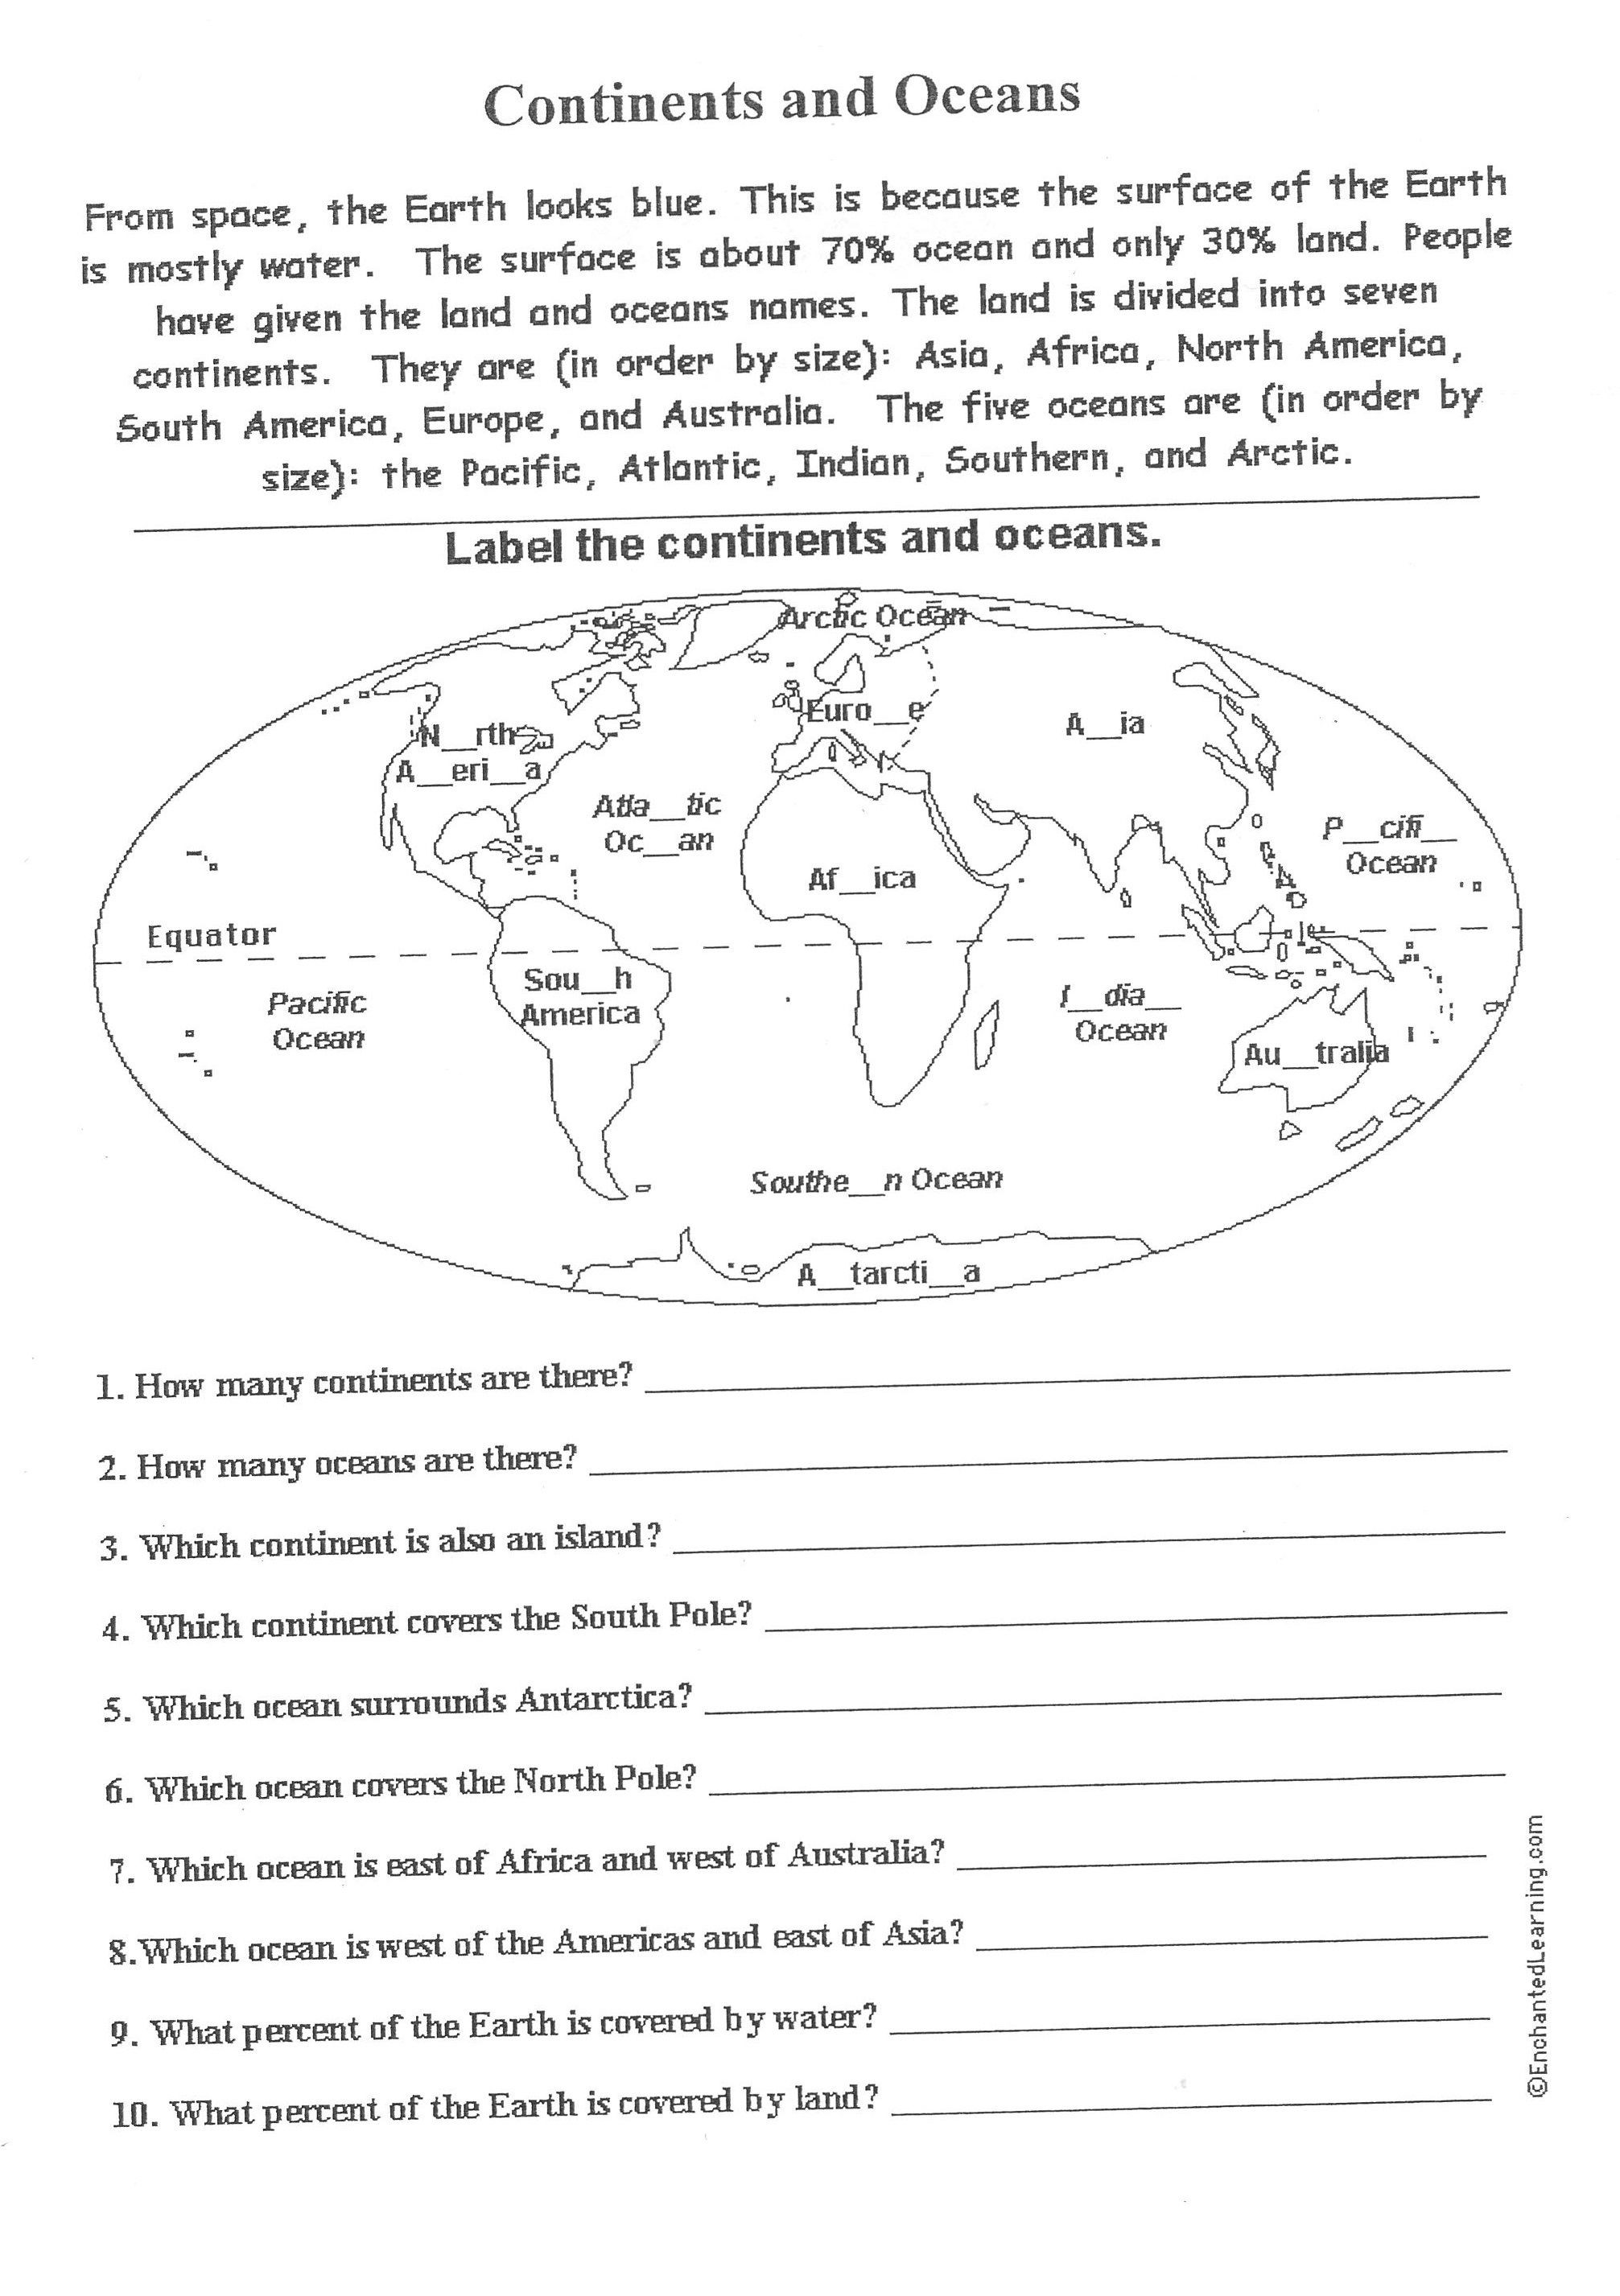 Oceans and Continents Worksheets Printable Free Printable Worksheets On Continents and Oceans Google